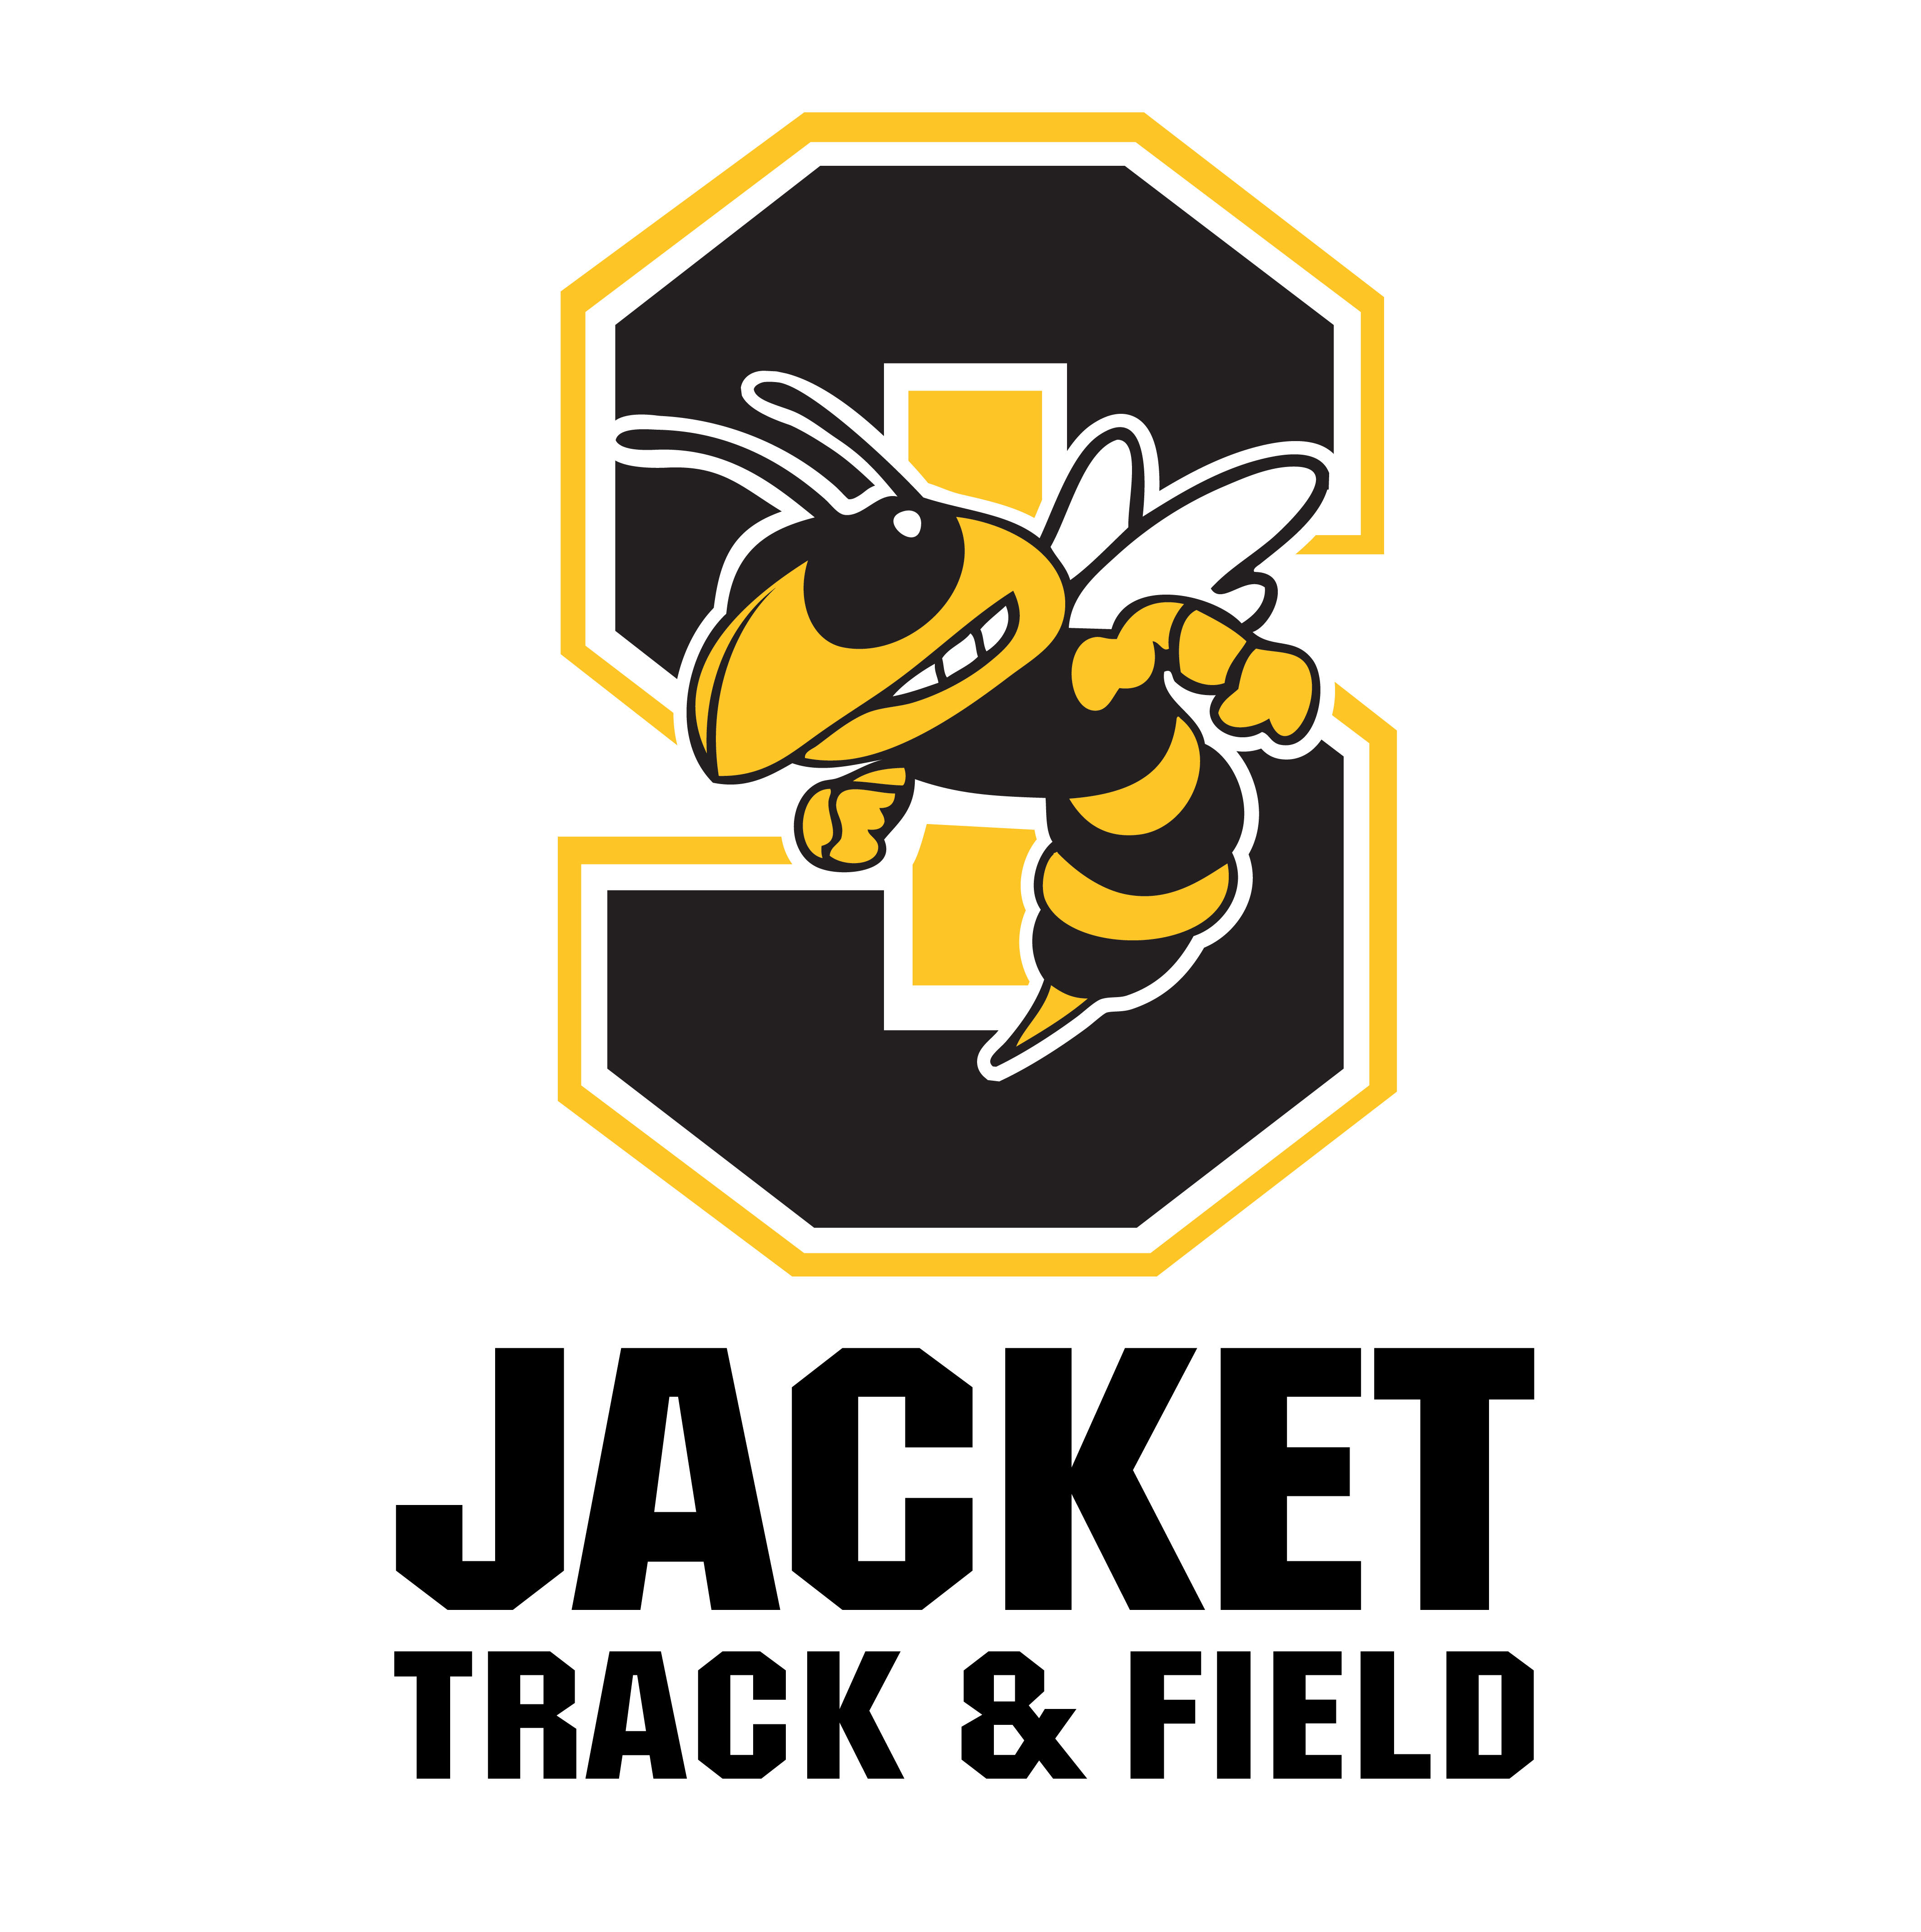 Jacket Track and Field logo